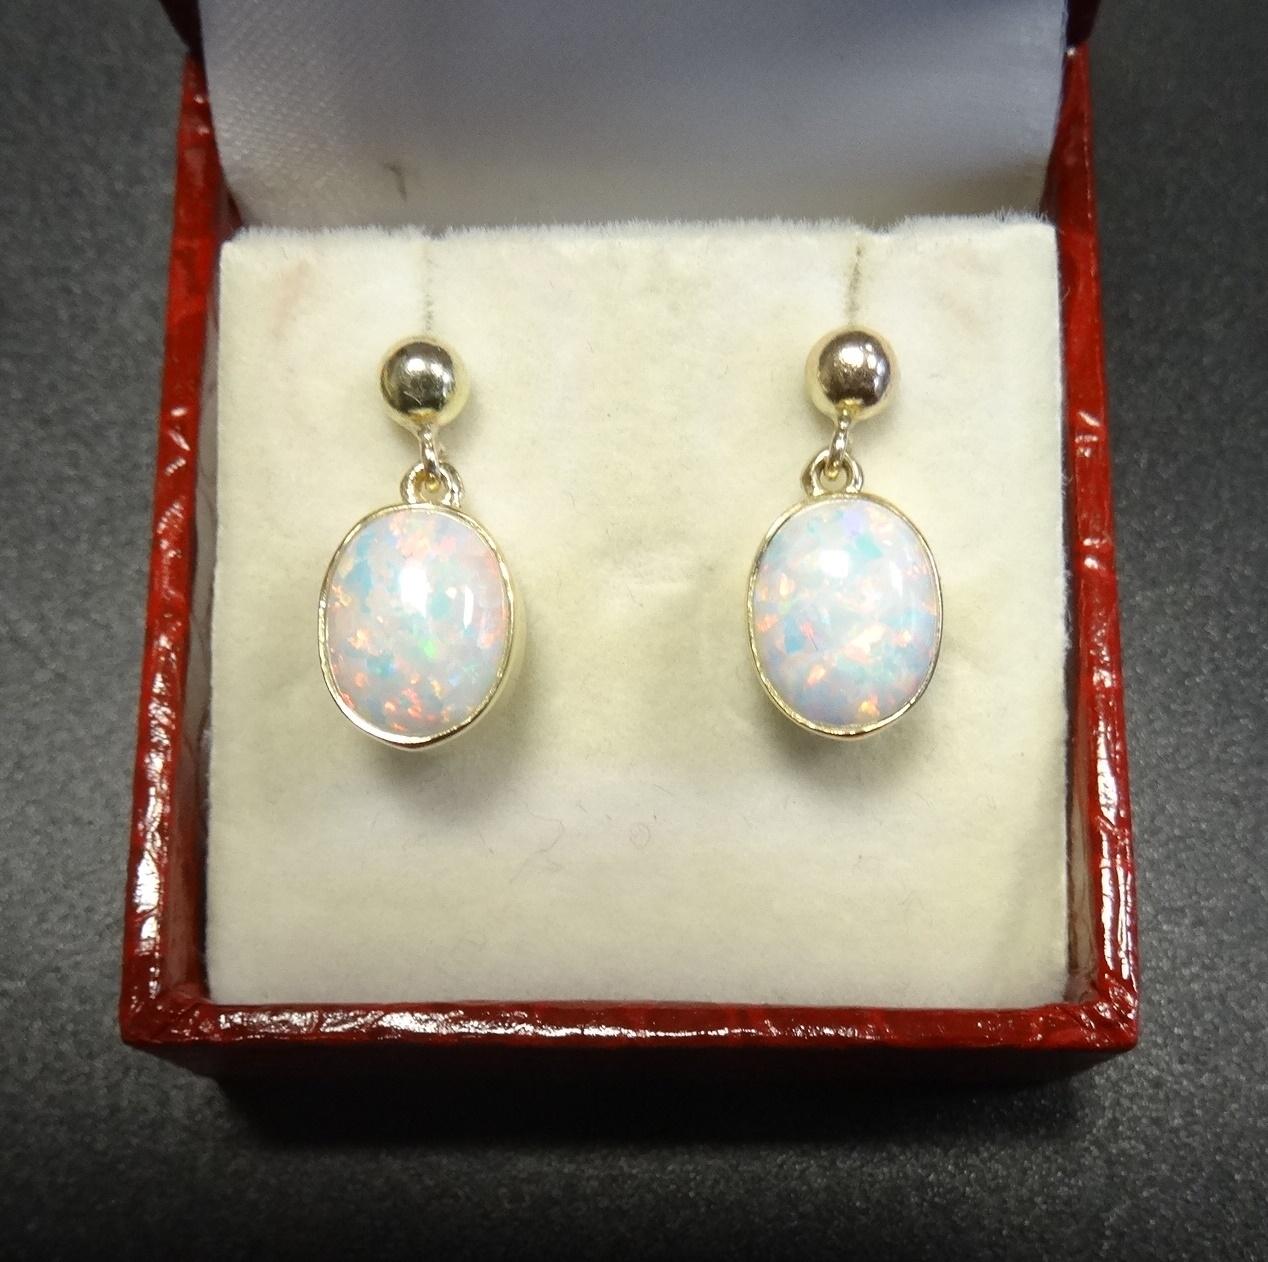 PAIR OF OPAL DROP EARRINGS the oval cabochon opals in nine carat gold settings